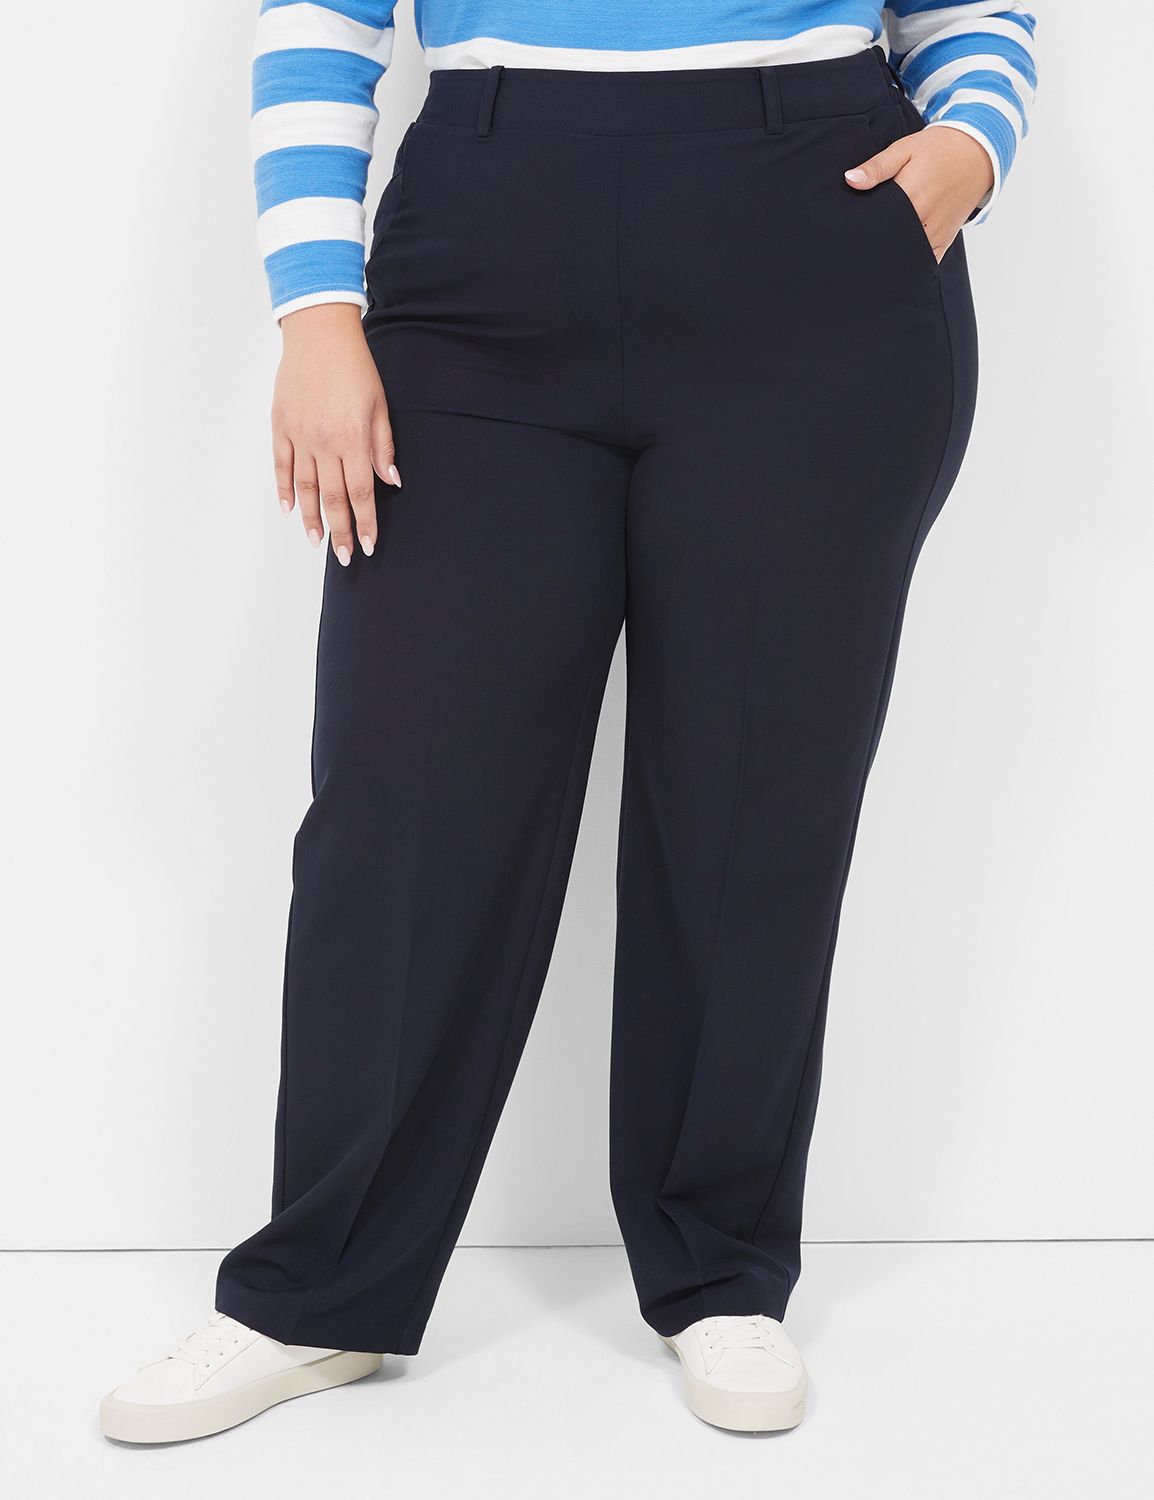 YARRA TRAIL PULL-ON SUPER STRETCH PANT NAVY - PLUS SIZE FIT – The